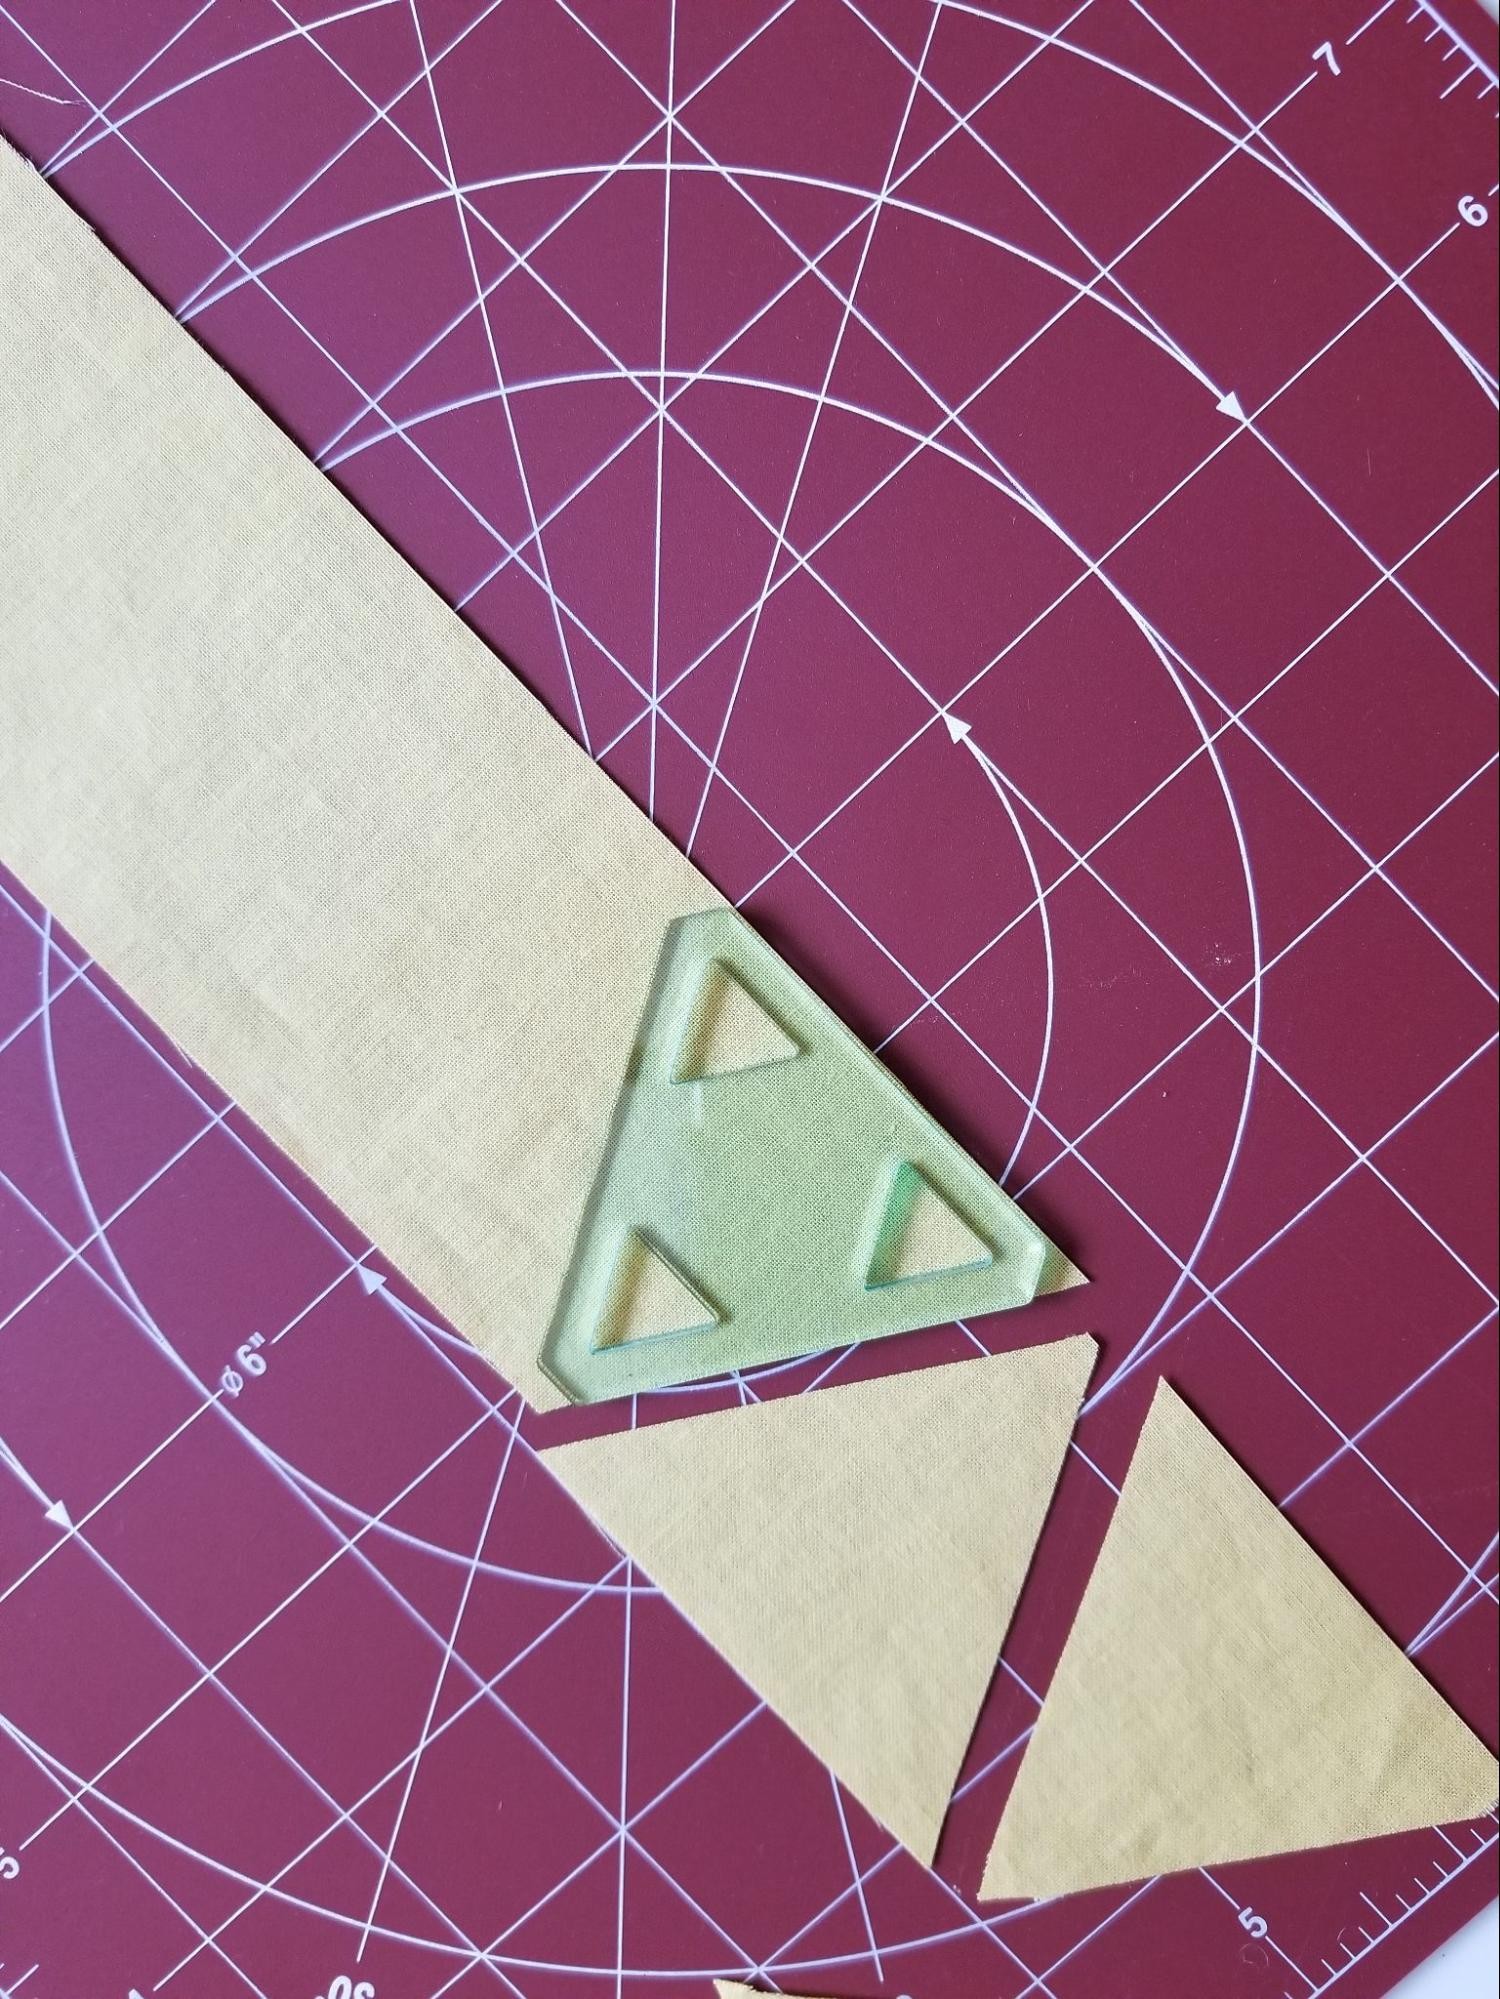 Showing two triangles cut from a strip of fabric while using a 60 degree triangle quilt template.